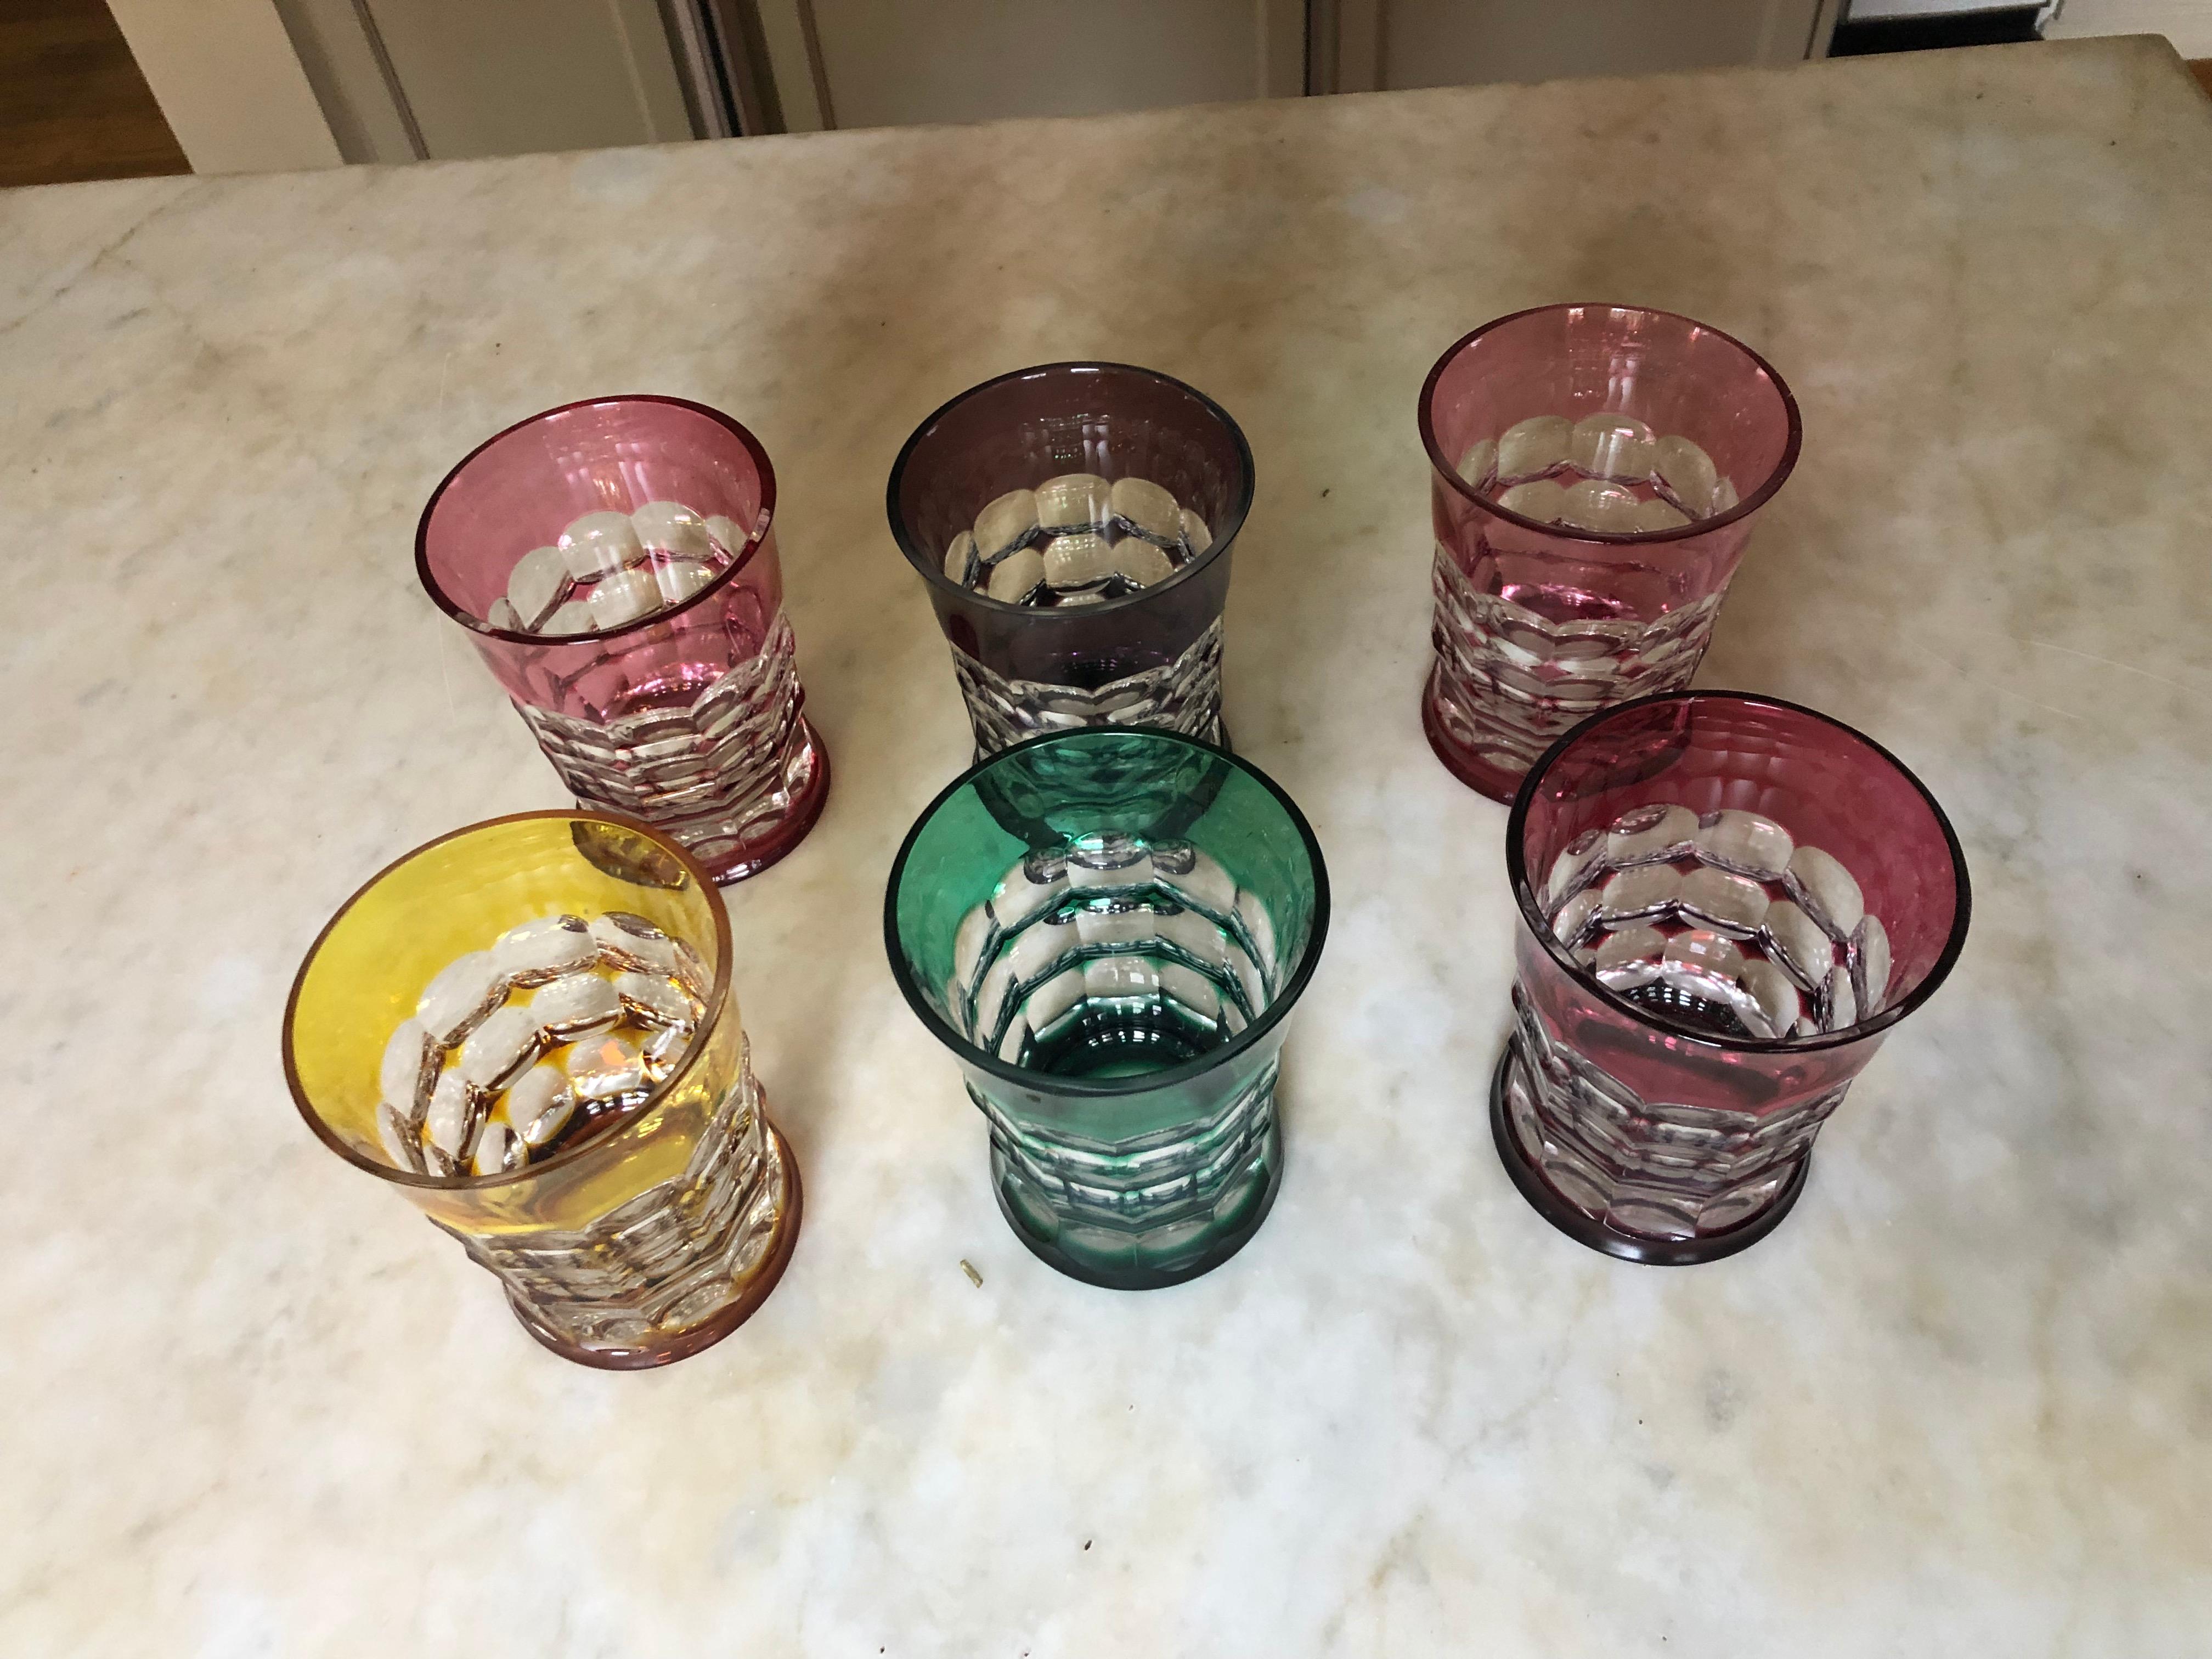 https://a.1stdibscdn.com/set-of-12-christian-lacroix-colored-crystal-tumbler-glasses-in-4-varied-colors-for-sale/f_35353/f_133027821547258527694/IMG_6523_master.jpeg